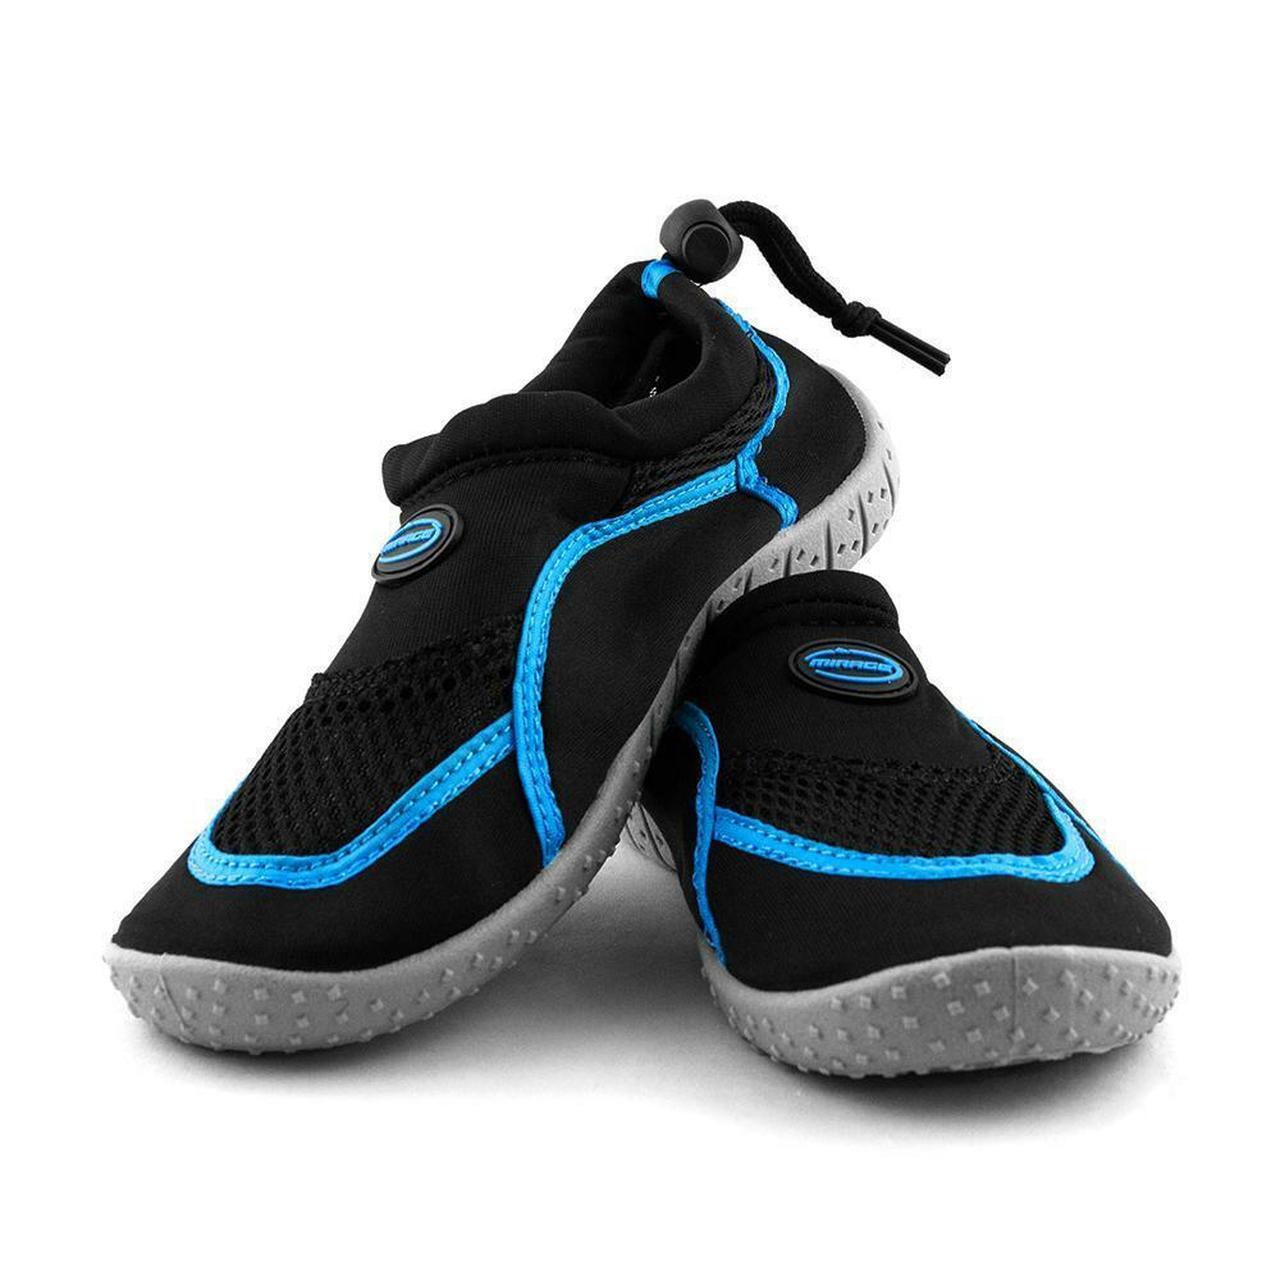 Toddler/Little Kid/Bid Kid Scurtain Kids Sports Water Shoes Quick Dry Barefoot Aqua Shoes 